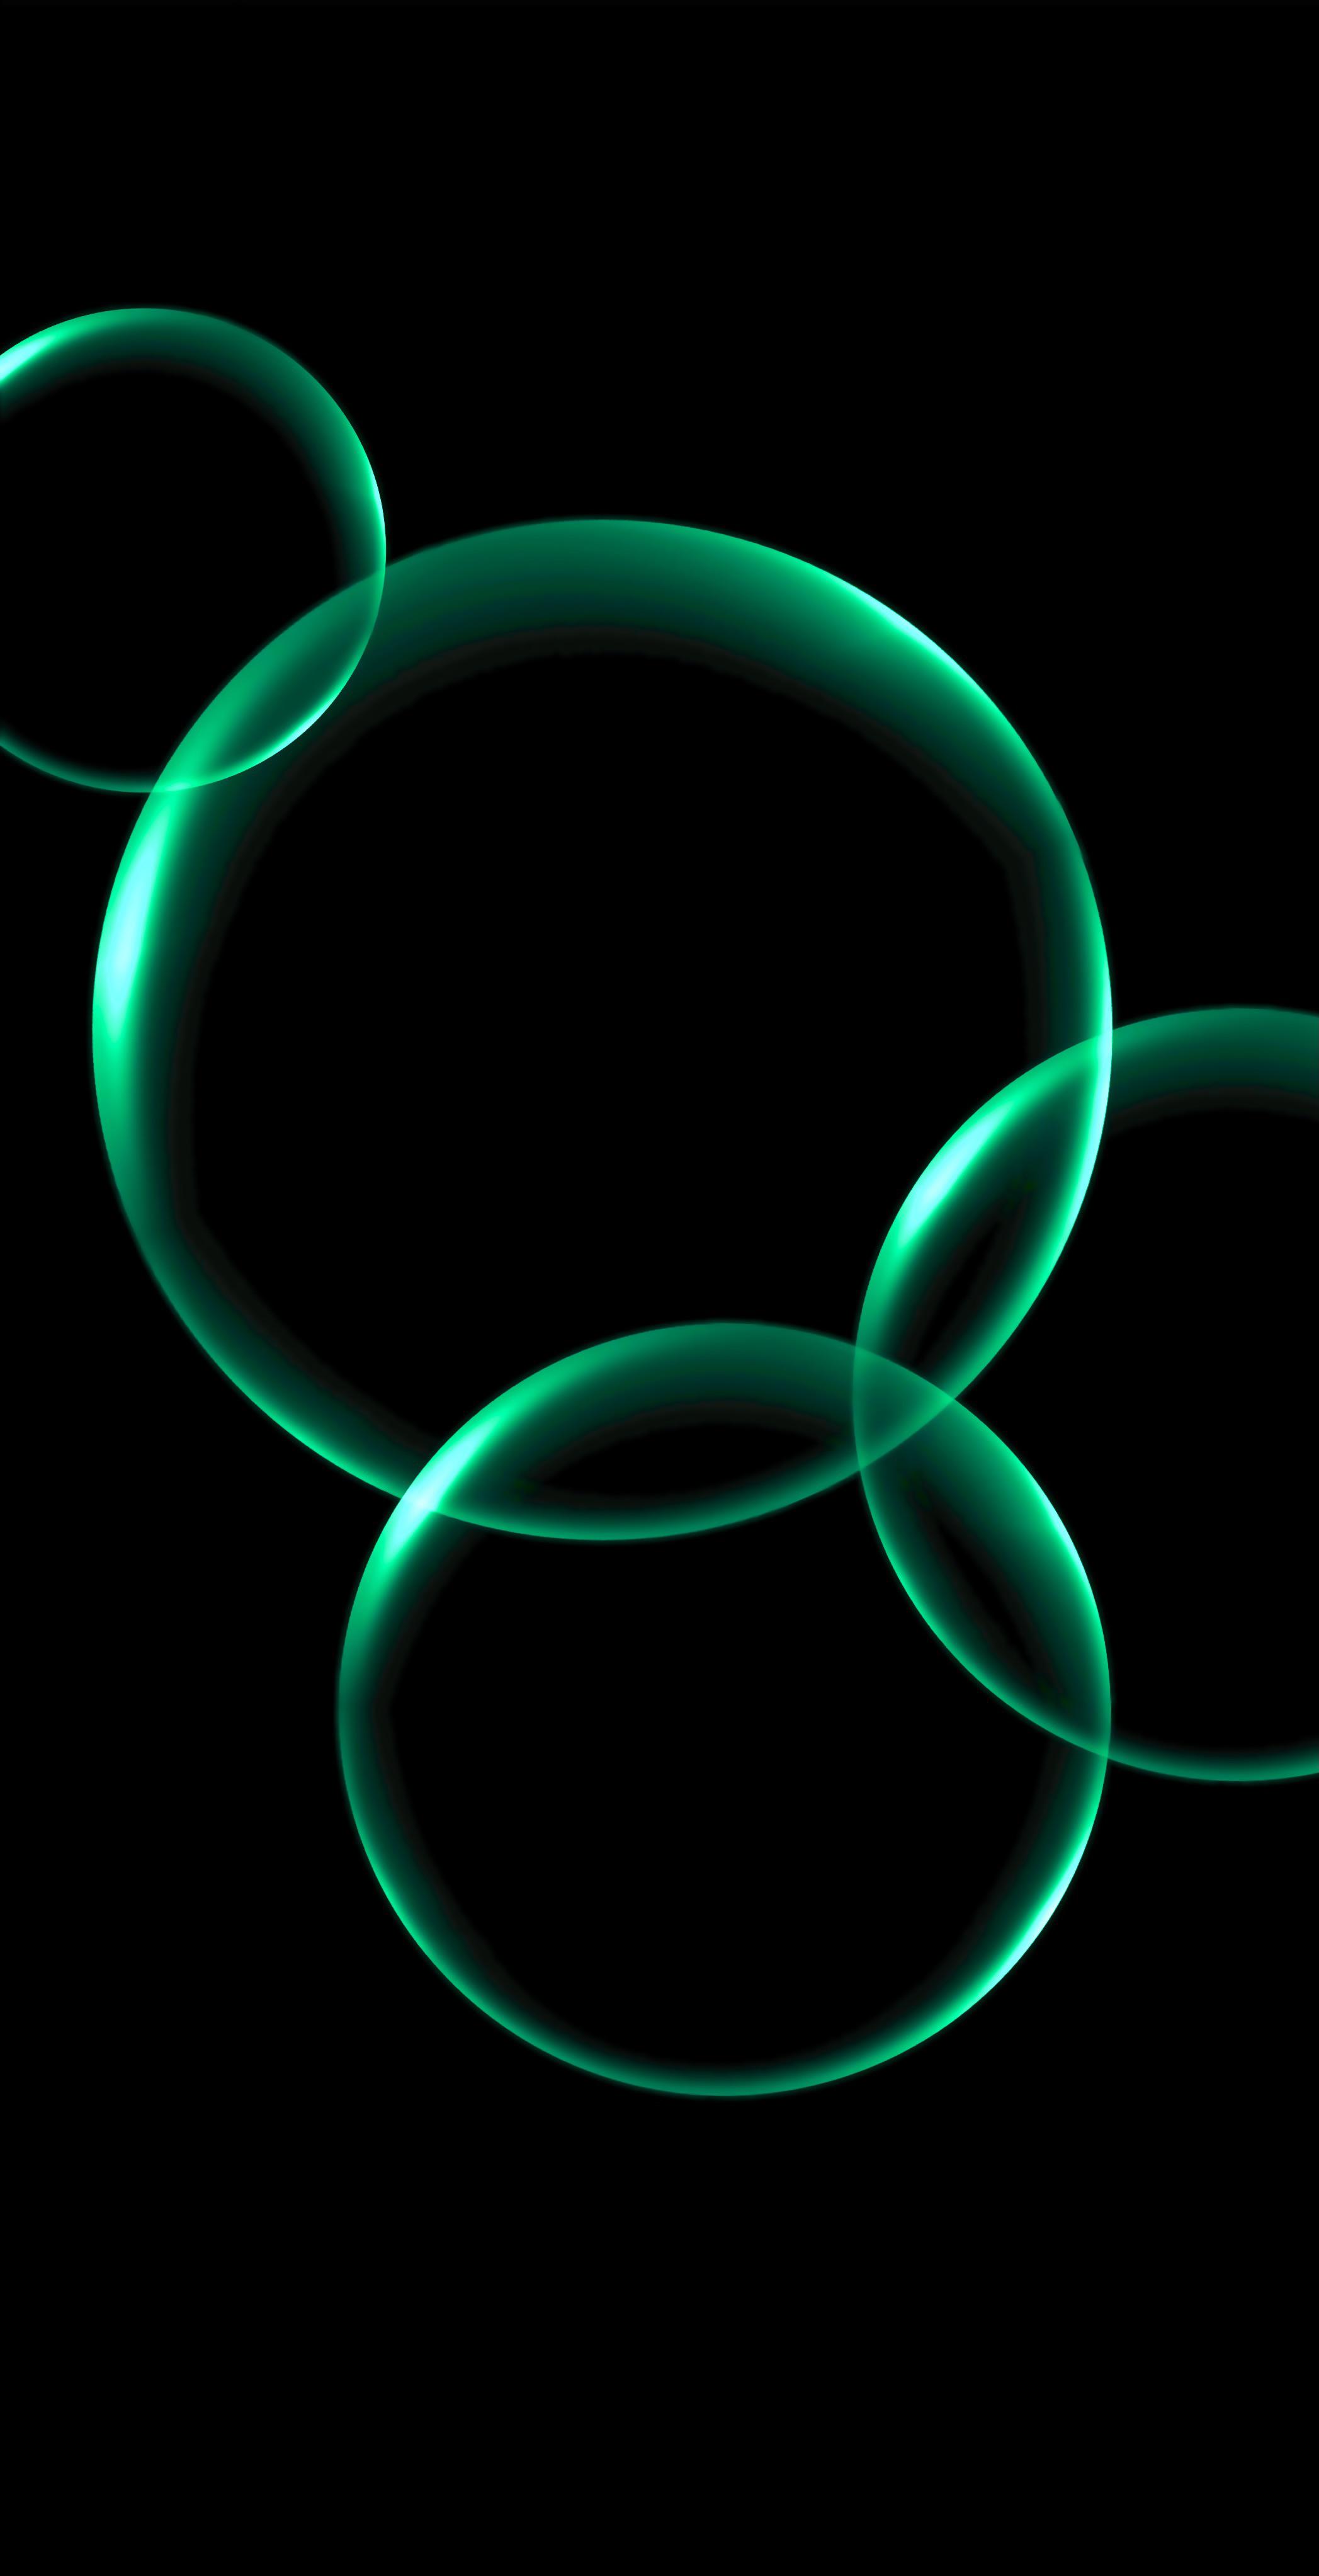 Black background green bubbles idk how to make it oled optimized - iphonexwallpaper